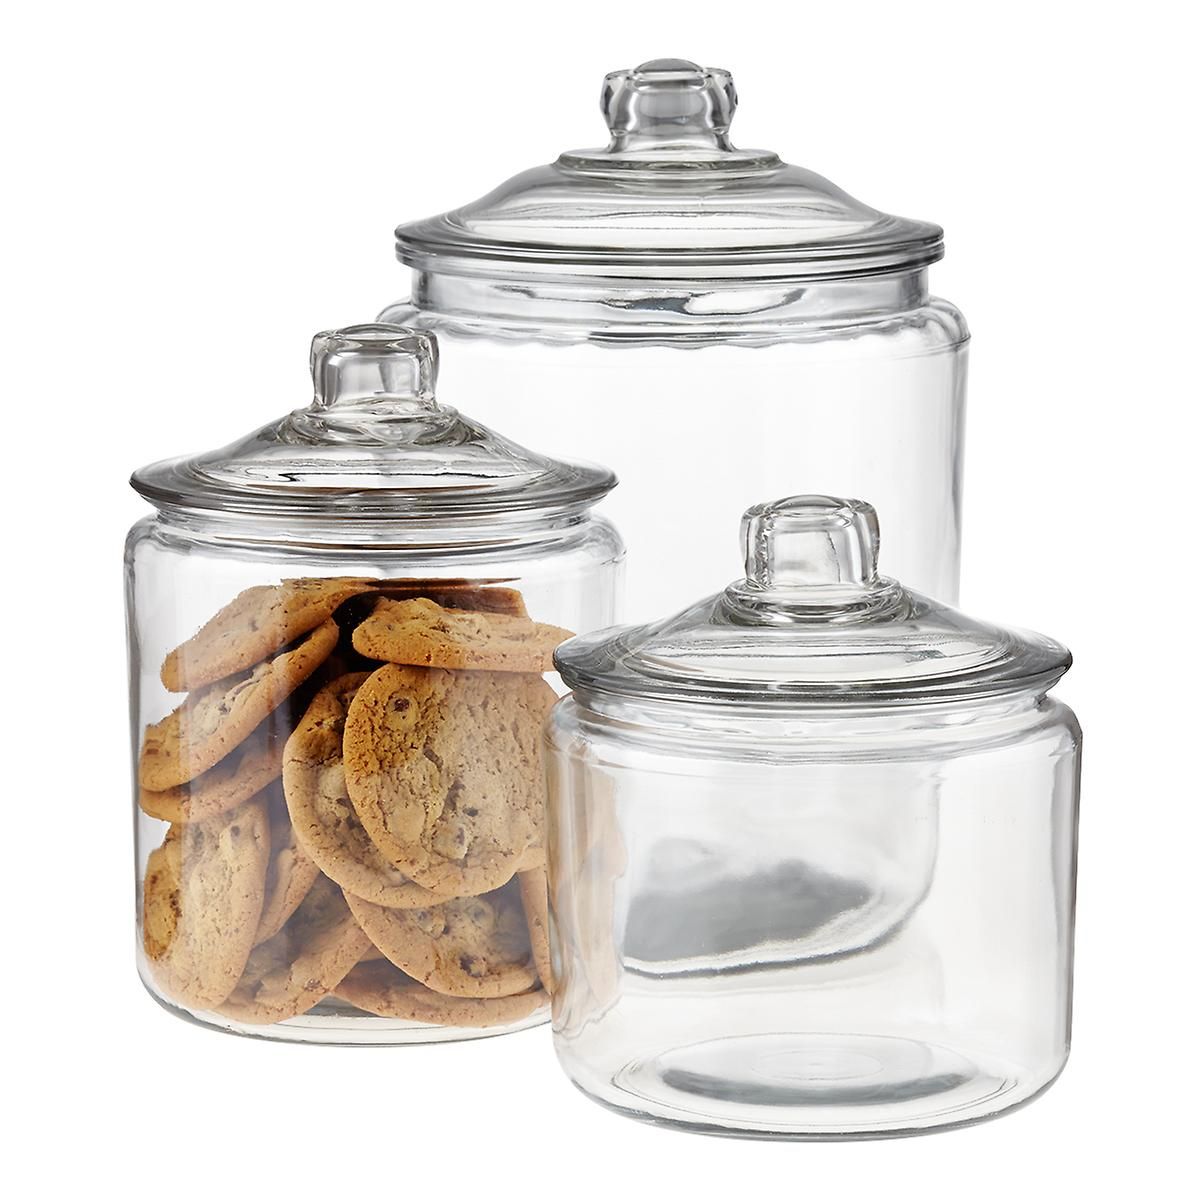 anchor 1 gal. Glass Canister Glass Lid | The Container Store